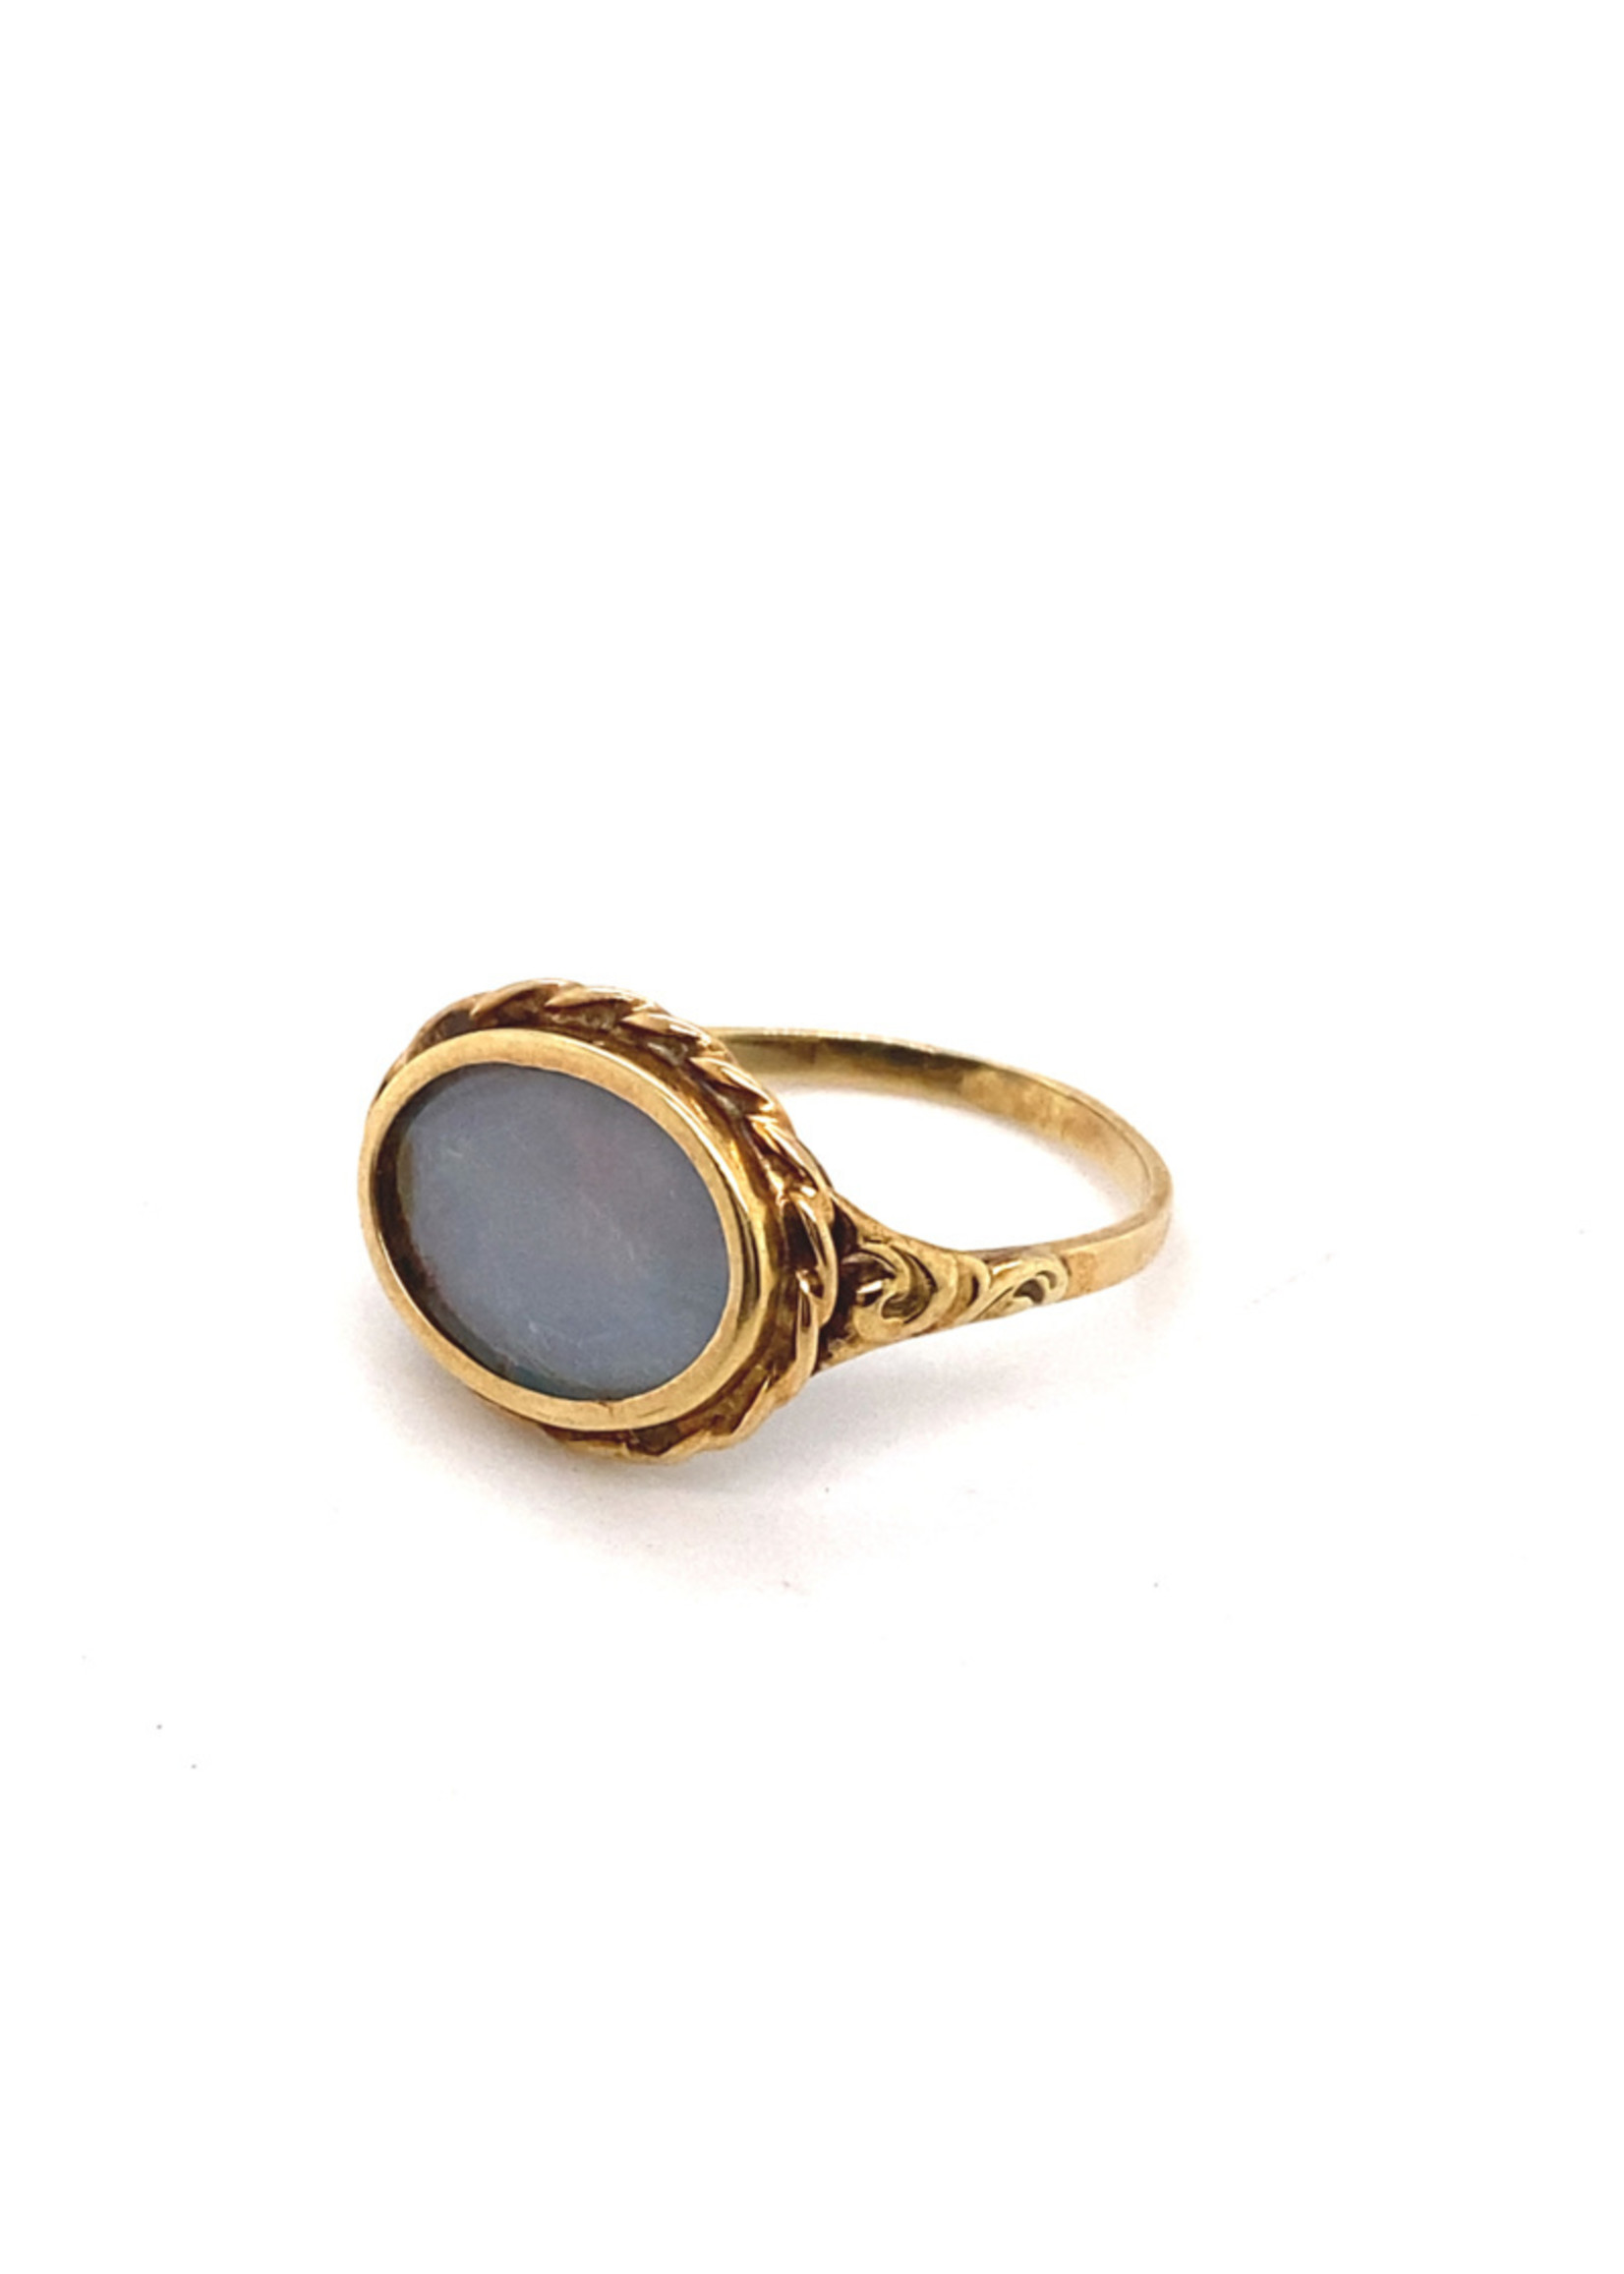 Vintage & Occasion Occasion gouden ring met opaaldoublet